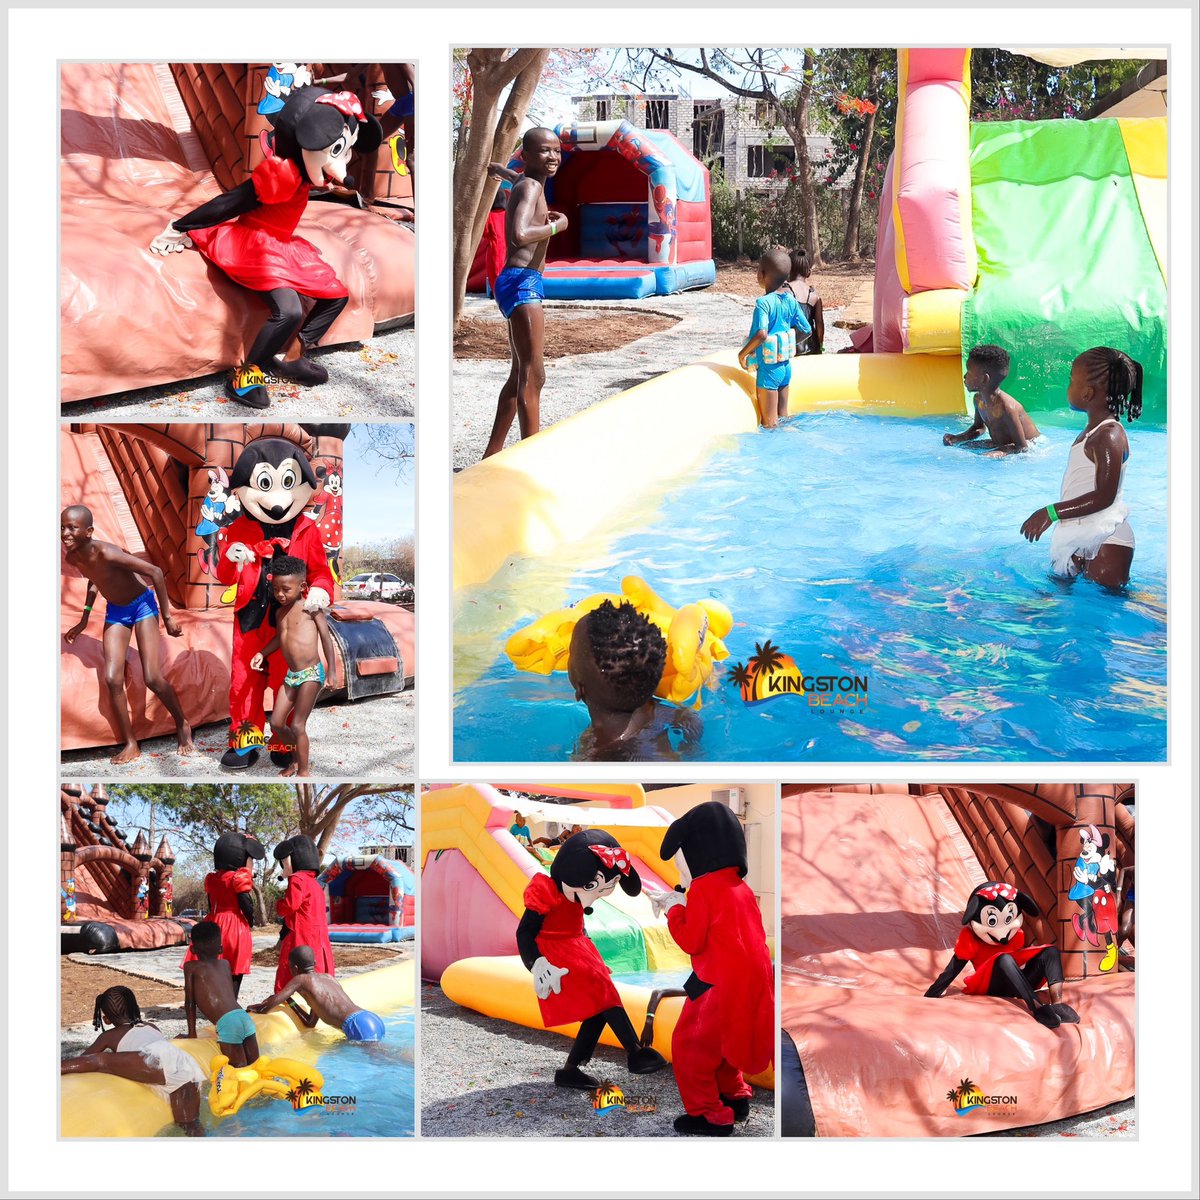 Happening Now! It’s Sunday FunDay Here at Kingston. 🏰🎠🎢

Bring your Kids for some quality time. Enjoy the best ambience, amazing cuisines and Happy Hour Offers. 

#KingstonLife #SundayFunDay #FamilyTime #BouncingCastle #BeachVibes #Food #Ambience #Mombasa #Kenya